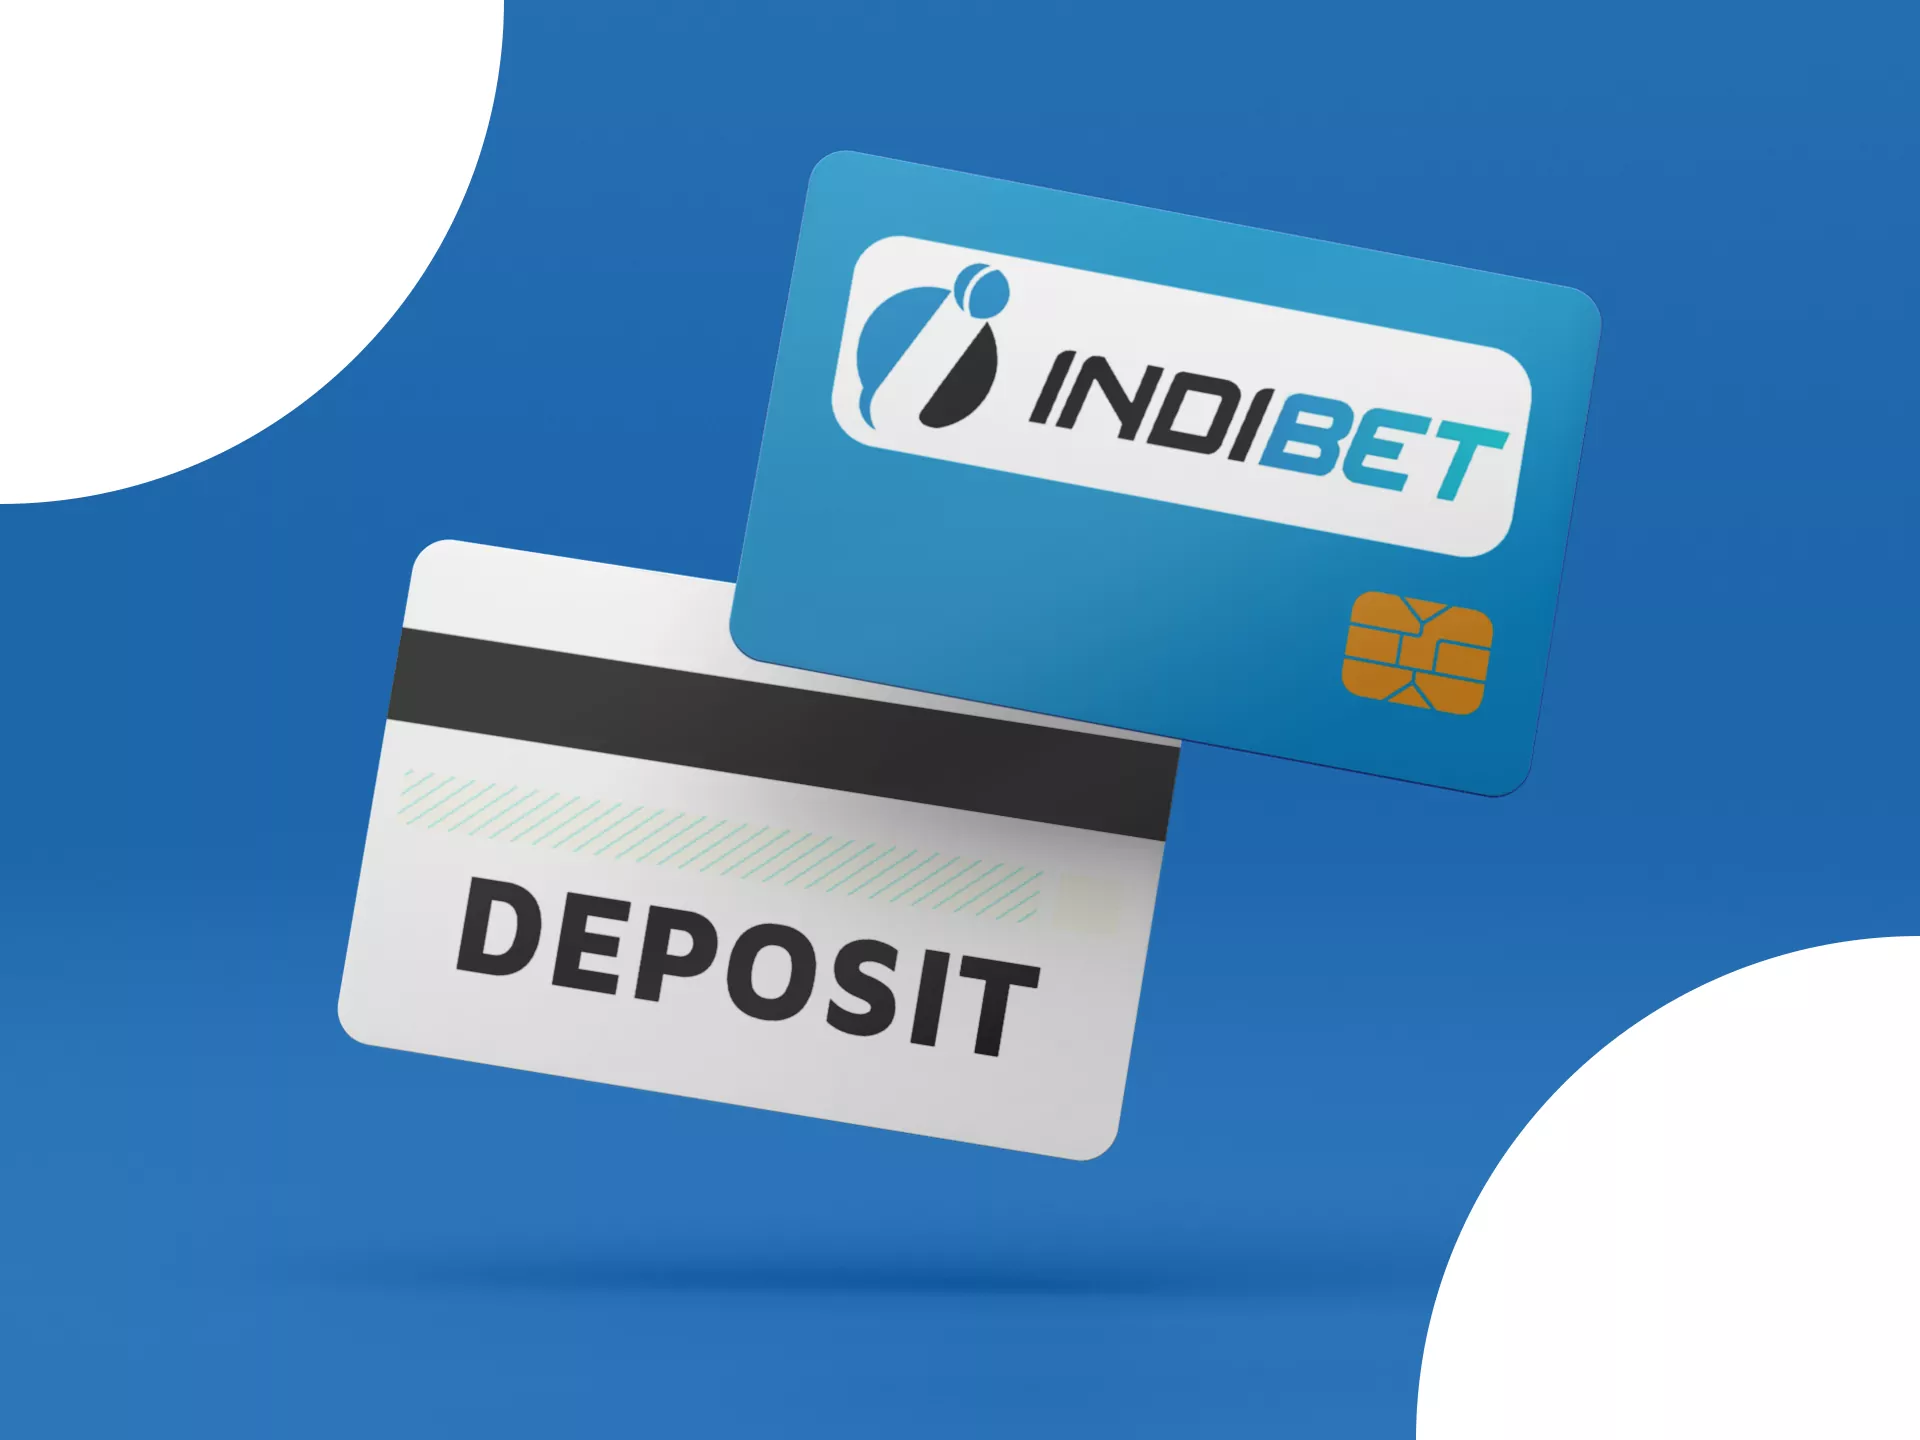 Deposit at Indibet without problems.